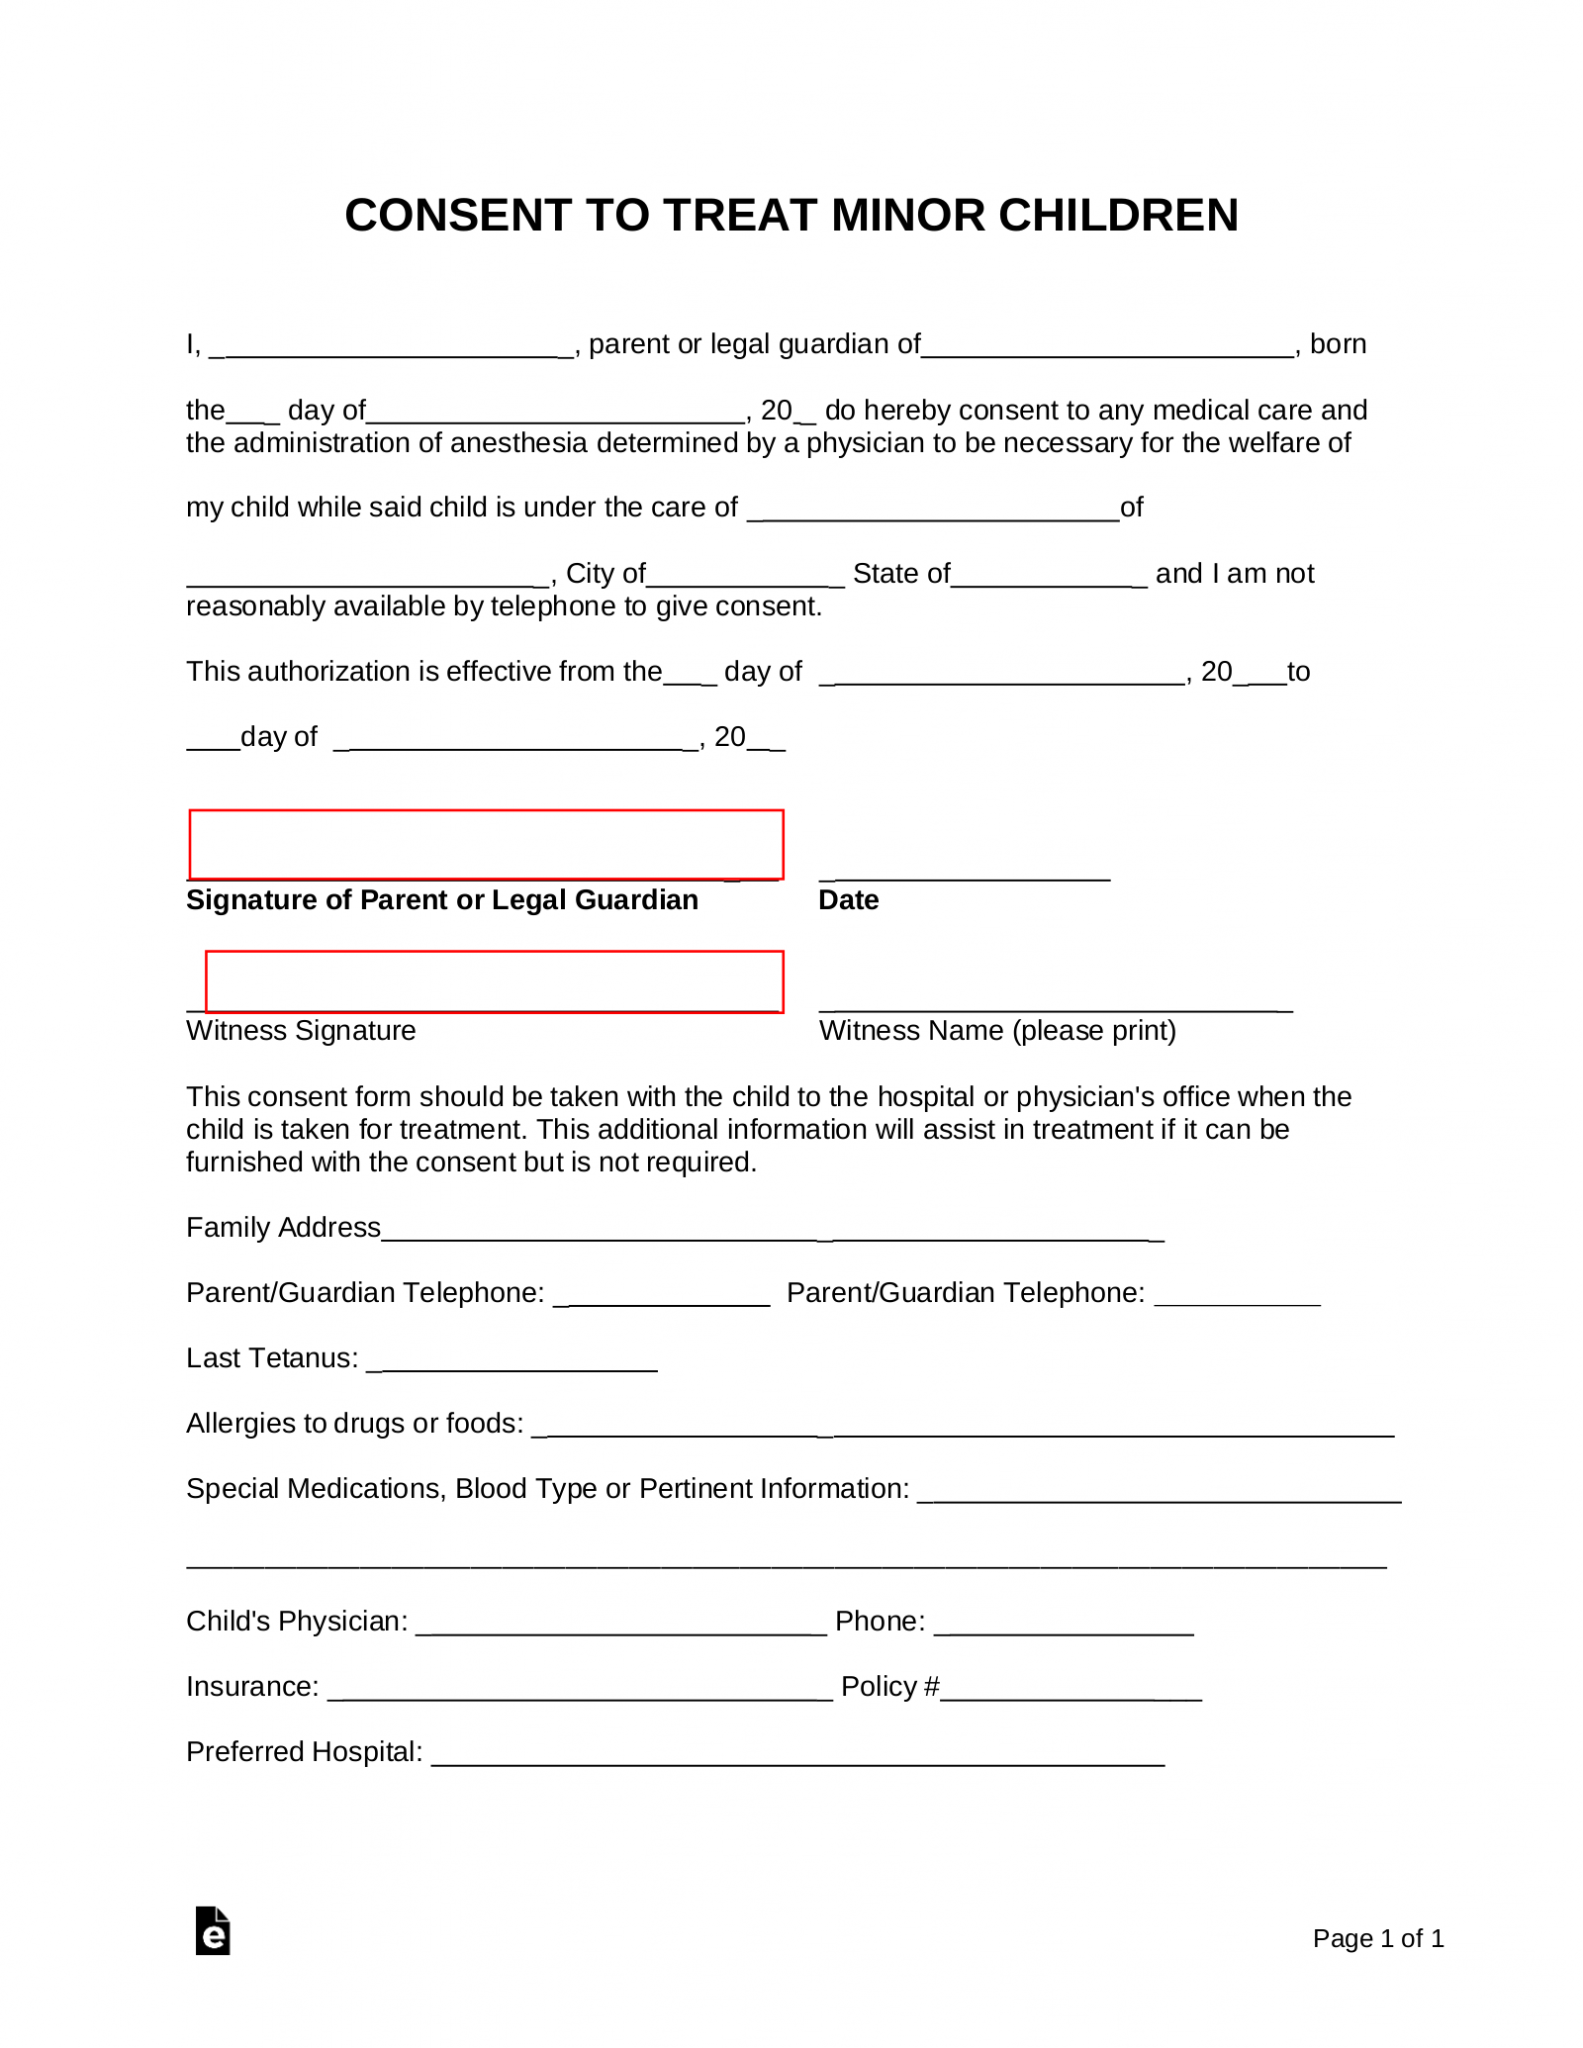 Example Of Consent To Treat Form